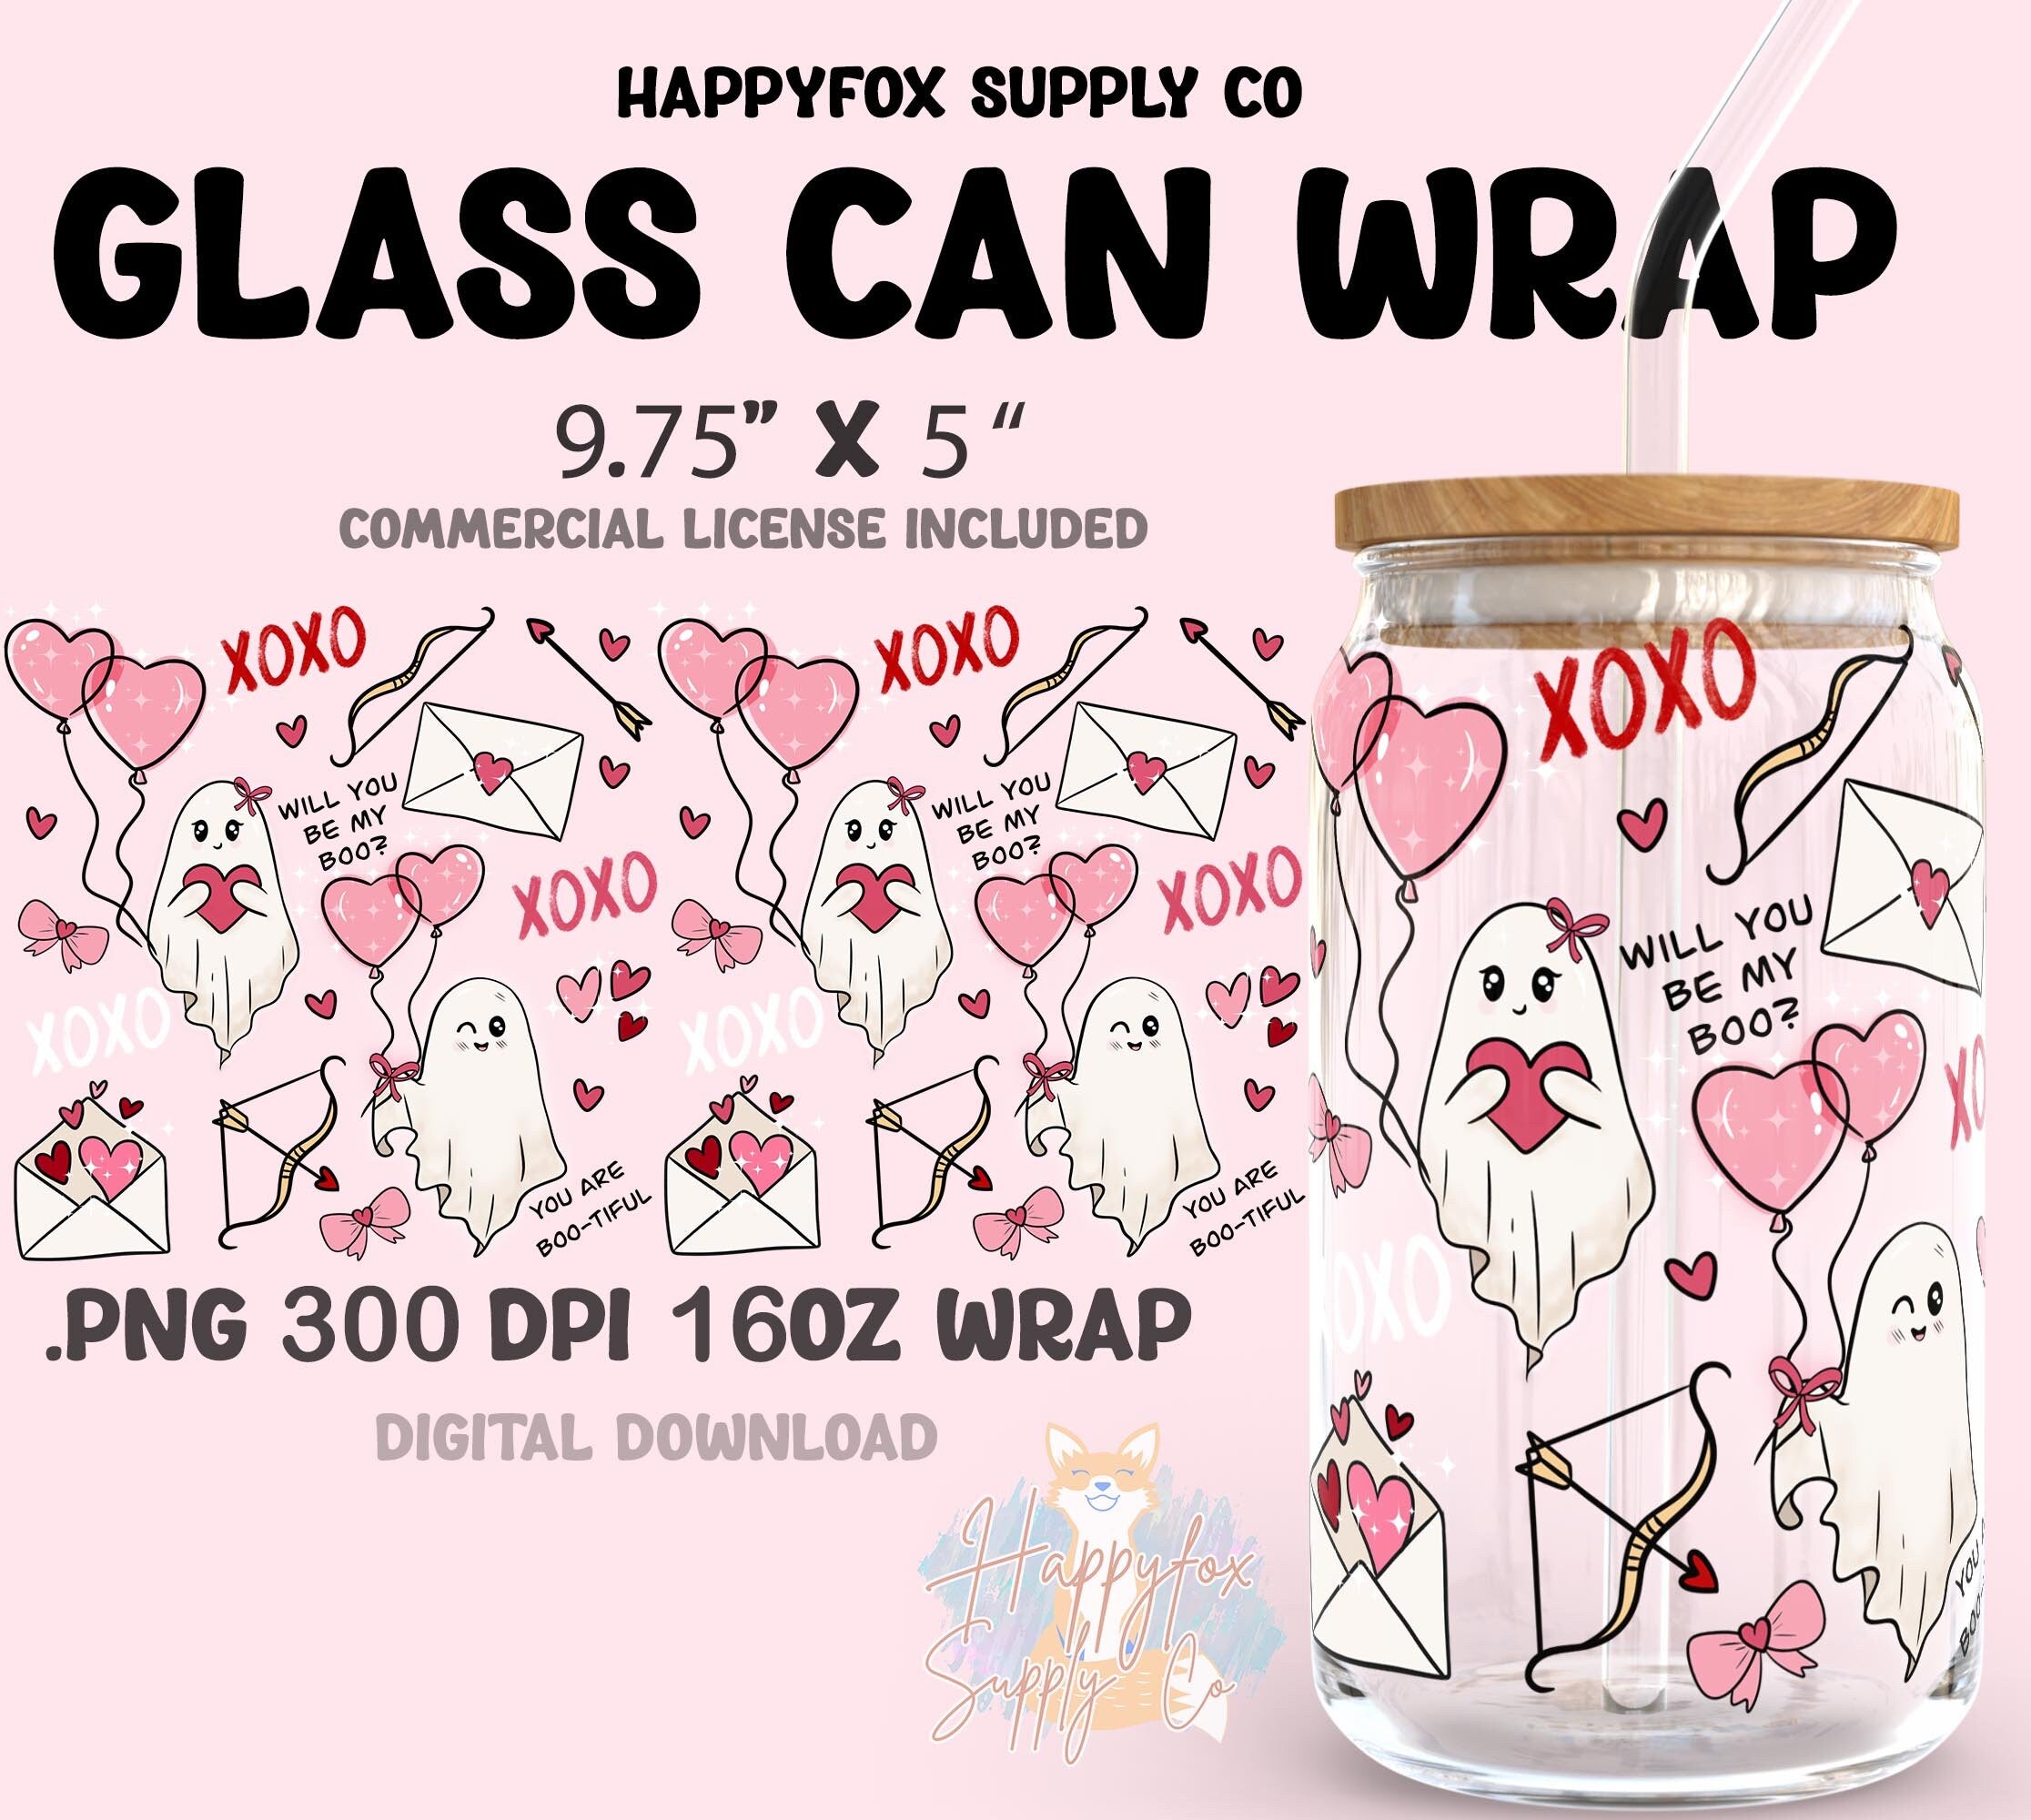 Digital File 16oz Glass Can Wrap 300 DPI PNG Be My Boo Spooky UVDTF Sublimation Printed Vinyl Transparent Wrap Mushrooms Spooky Valentine